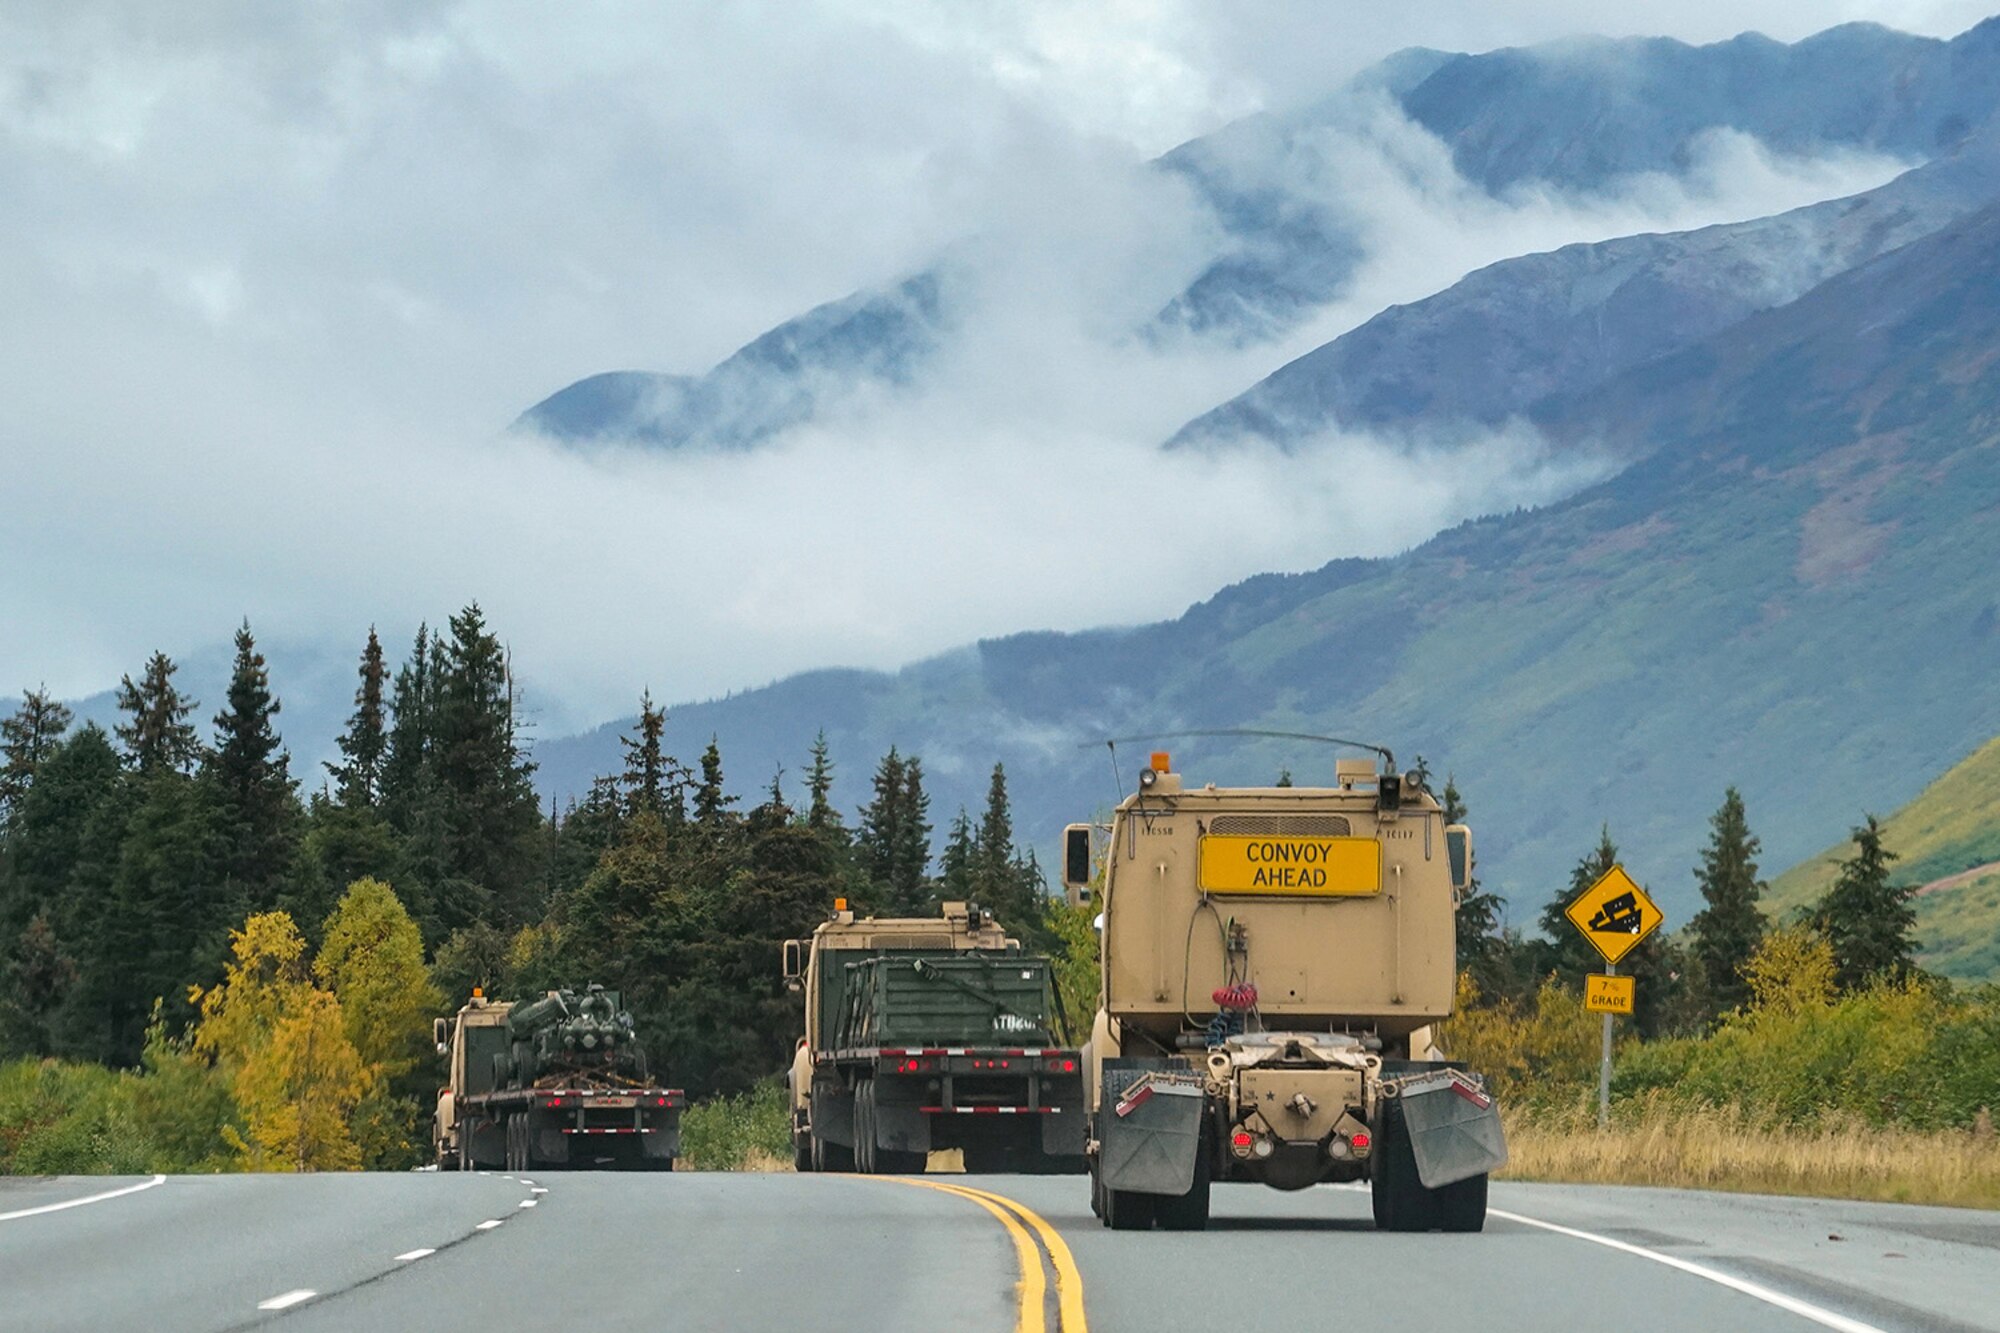 Soldiers assigned to the 109th Transportation Company, 17th Combat Support Sustainment Battalion, U.S. Army Alaska, convoy through the Kenai Penninsula after loading U.S. Marine Corps bulk fuel supplies and equipment from the U.S.S. Comstock (LSD-45), a Whidbey Island-class dock landing ship, at the port of Seward, Alaska, Sept. 19, 2019, for transport to Joint Base Elmendorf-Richardson, Alaska. The U.S. Navy is conducting an Arctic Expeditionary Capabilities Exercise to test its logistical effectiveness and joint-service interoperability while responding to conflict or disaster in an austere environment with no organic assets.